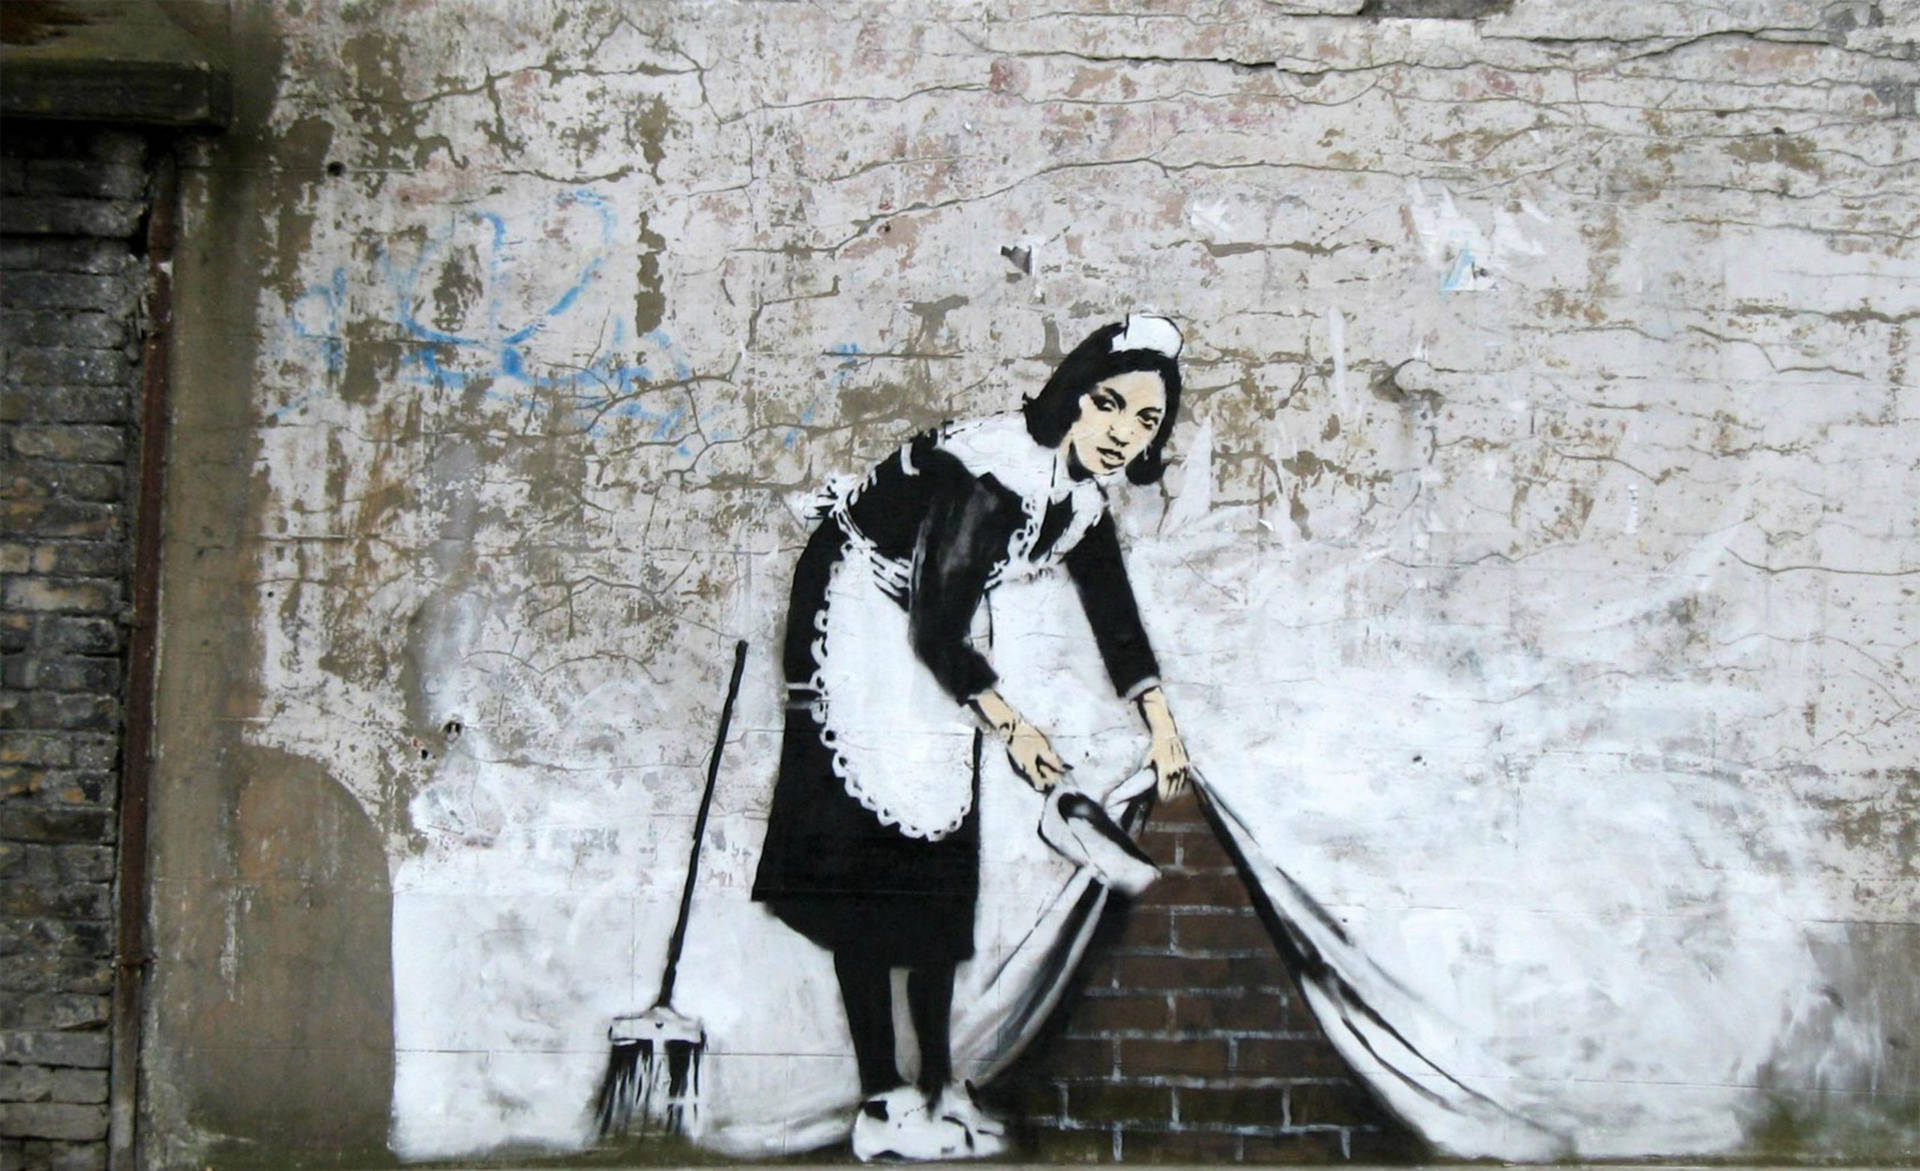 A Profound Display Of Street Art By Banksy Background